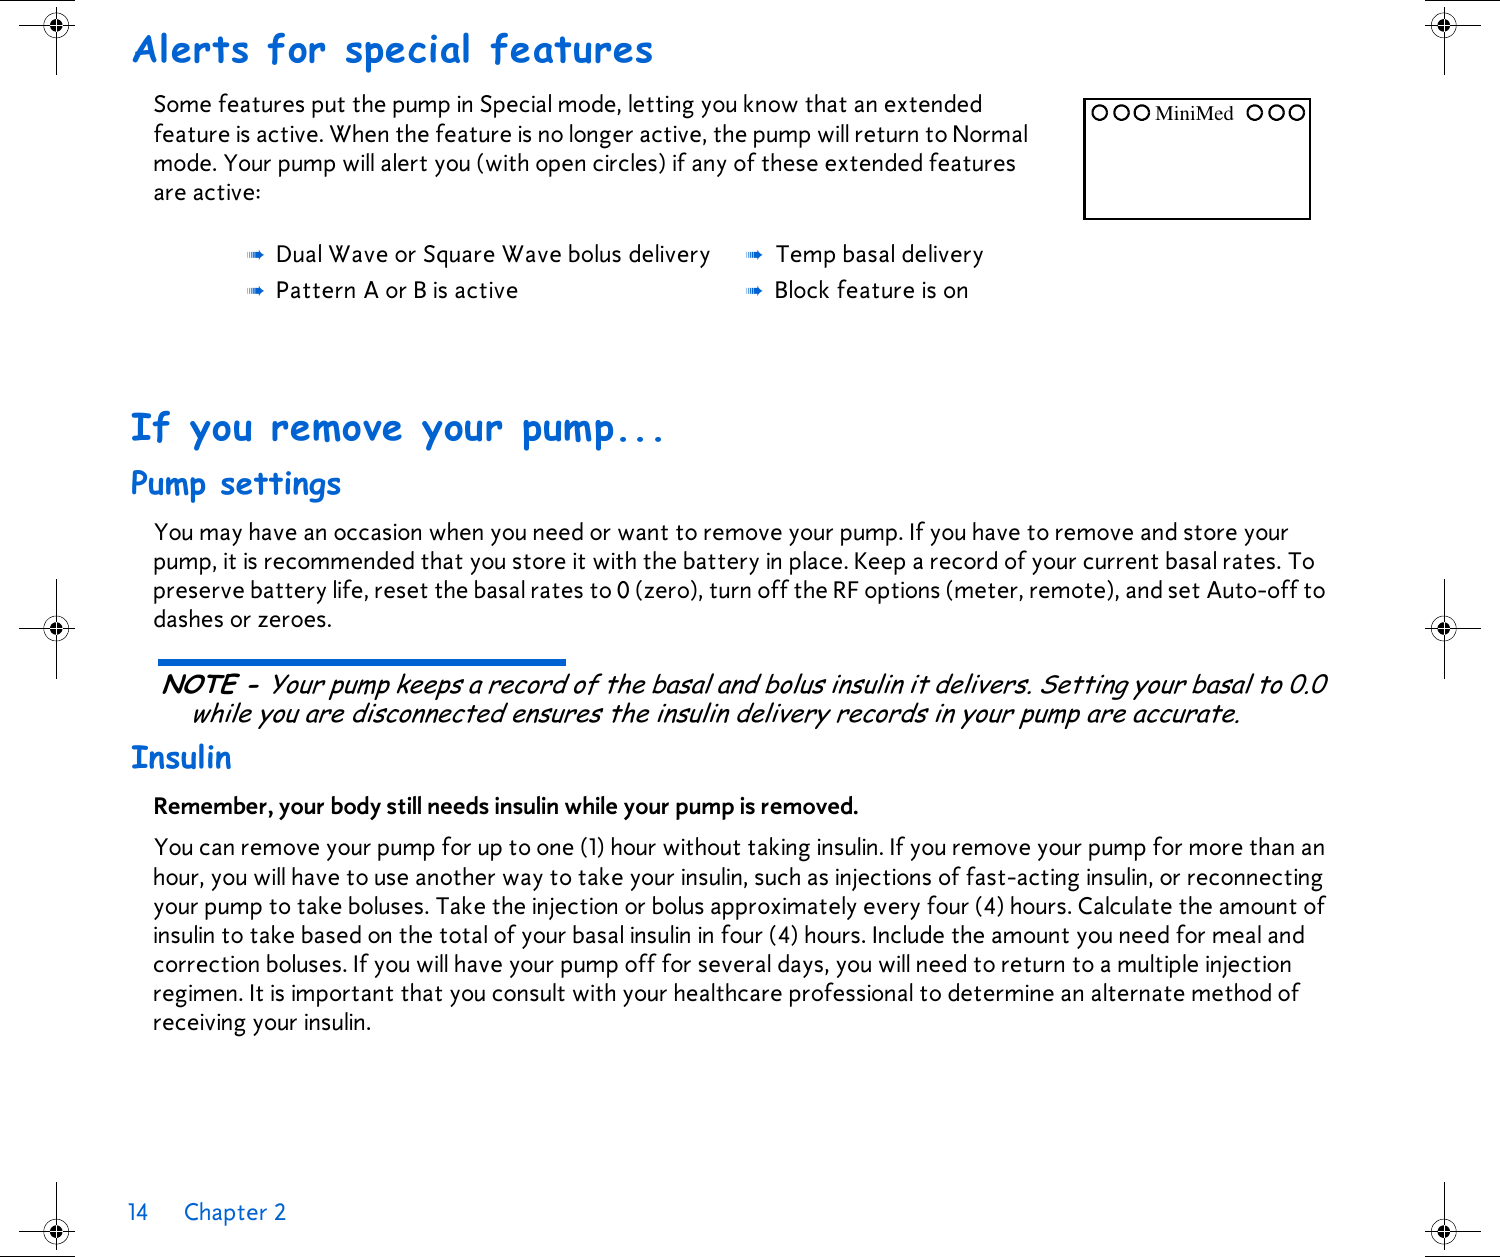 14 Chapter 2 Alerts for special features Some features put the pump in Special mode, letting you know that an extended feature is active. When the feature is no longer active, the pump will return to Normal mode. Your pump will alert you (with open circles) if any of these extended features are active: If you remove your pump... Pump settingsYou may have an occasion when you need or want to remove your pump. If you have to remove and store your pump, it is recommended that you store it with the battery in place. Keep a record of your current basal rates. To preserve battery life, reset the basal rates to 0 (zero), turn off the RF options (meter, remote), and set Auto-off to dashes or zeroes.NOTE - Your pump keeps a record of the basal and bolus insulin it delivers. Setting your basal to 0.0 while you are disconnected ensures the insulin delivery records in your pump are accurate.InsulinRemember, your body still needs insulin while your pump is removed. You can remove your pump for up to one (1) hour without taking insulin. If you remove your pump for more than an hour, you will have to use another way to take your insulin, such as injections of fast-acting insulin, or reconnecting your pump to take boluses. Take the injection or bolus approximately every four (4) hours. Calculate the amount of insulin to take based on the total of your basal insulin in four (4) hours. Include the amount you need for meal and correction boluses. If you will have your pump off for several days, you will need to return to a multiple injection regimen. It is important that you consult with your healthcare professional to determine an alternate method of receiving your insulin. ➠Dual Wave or Square Wave bolus delivery➠Pattern A or B is active➠Temp basal delivery➠Block feature is onMiniMed